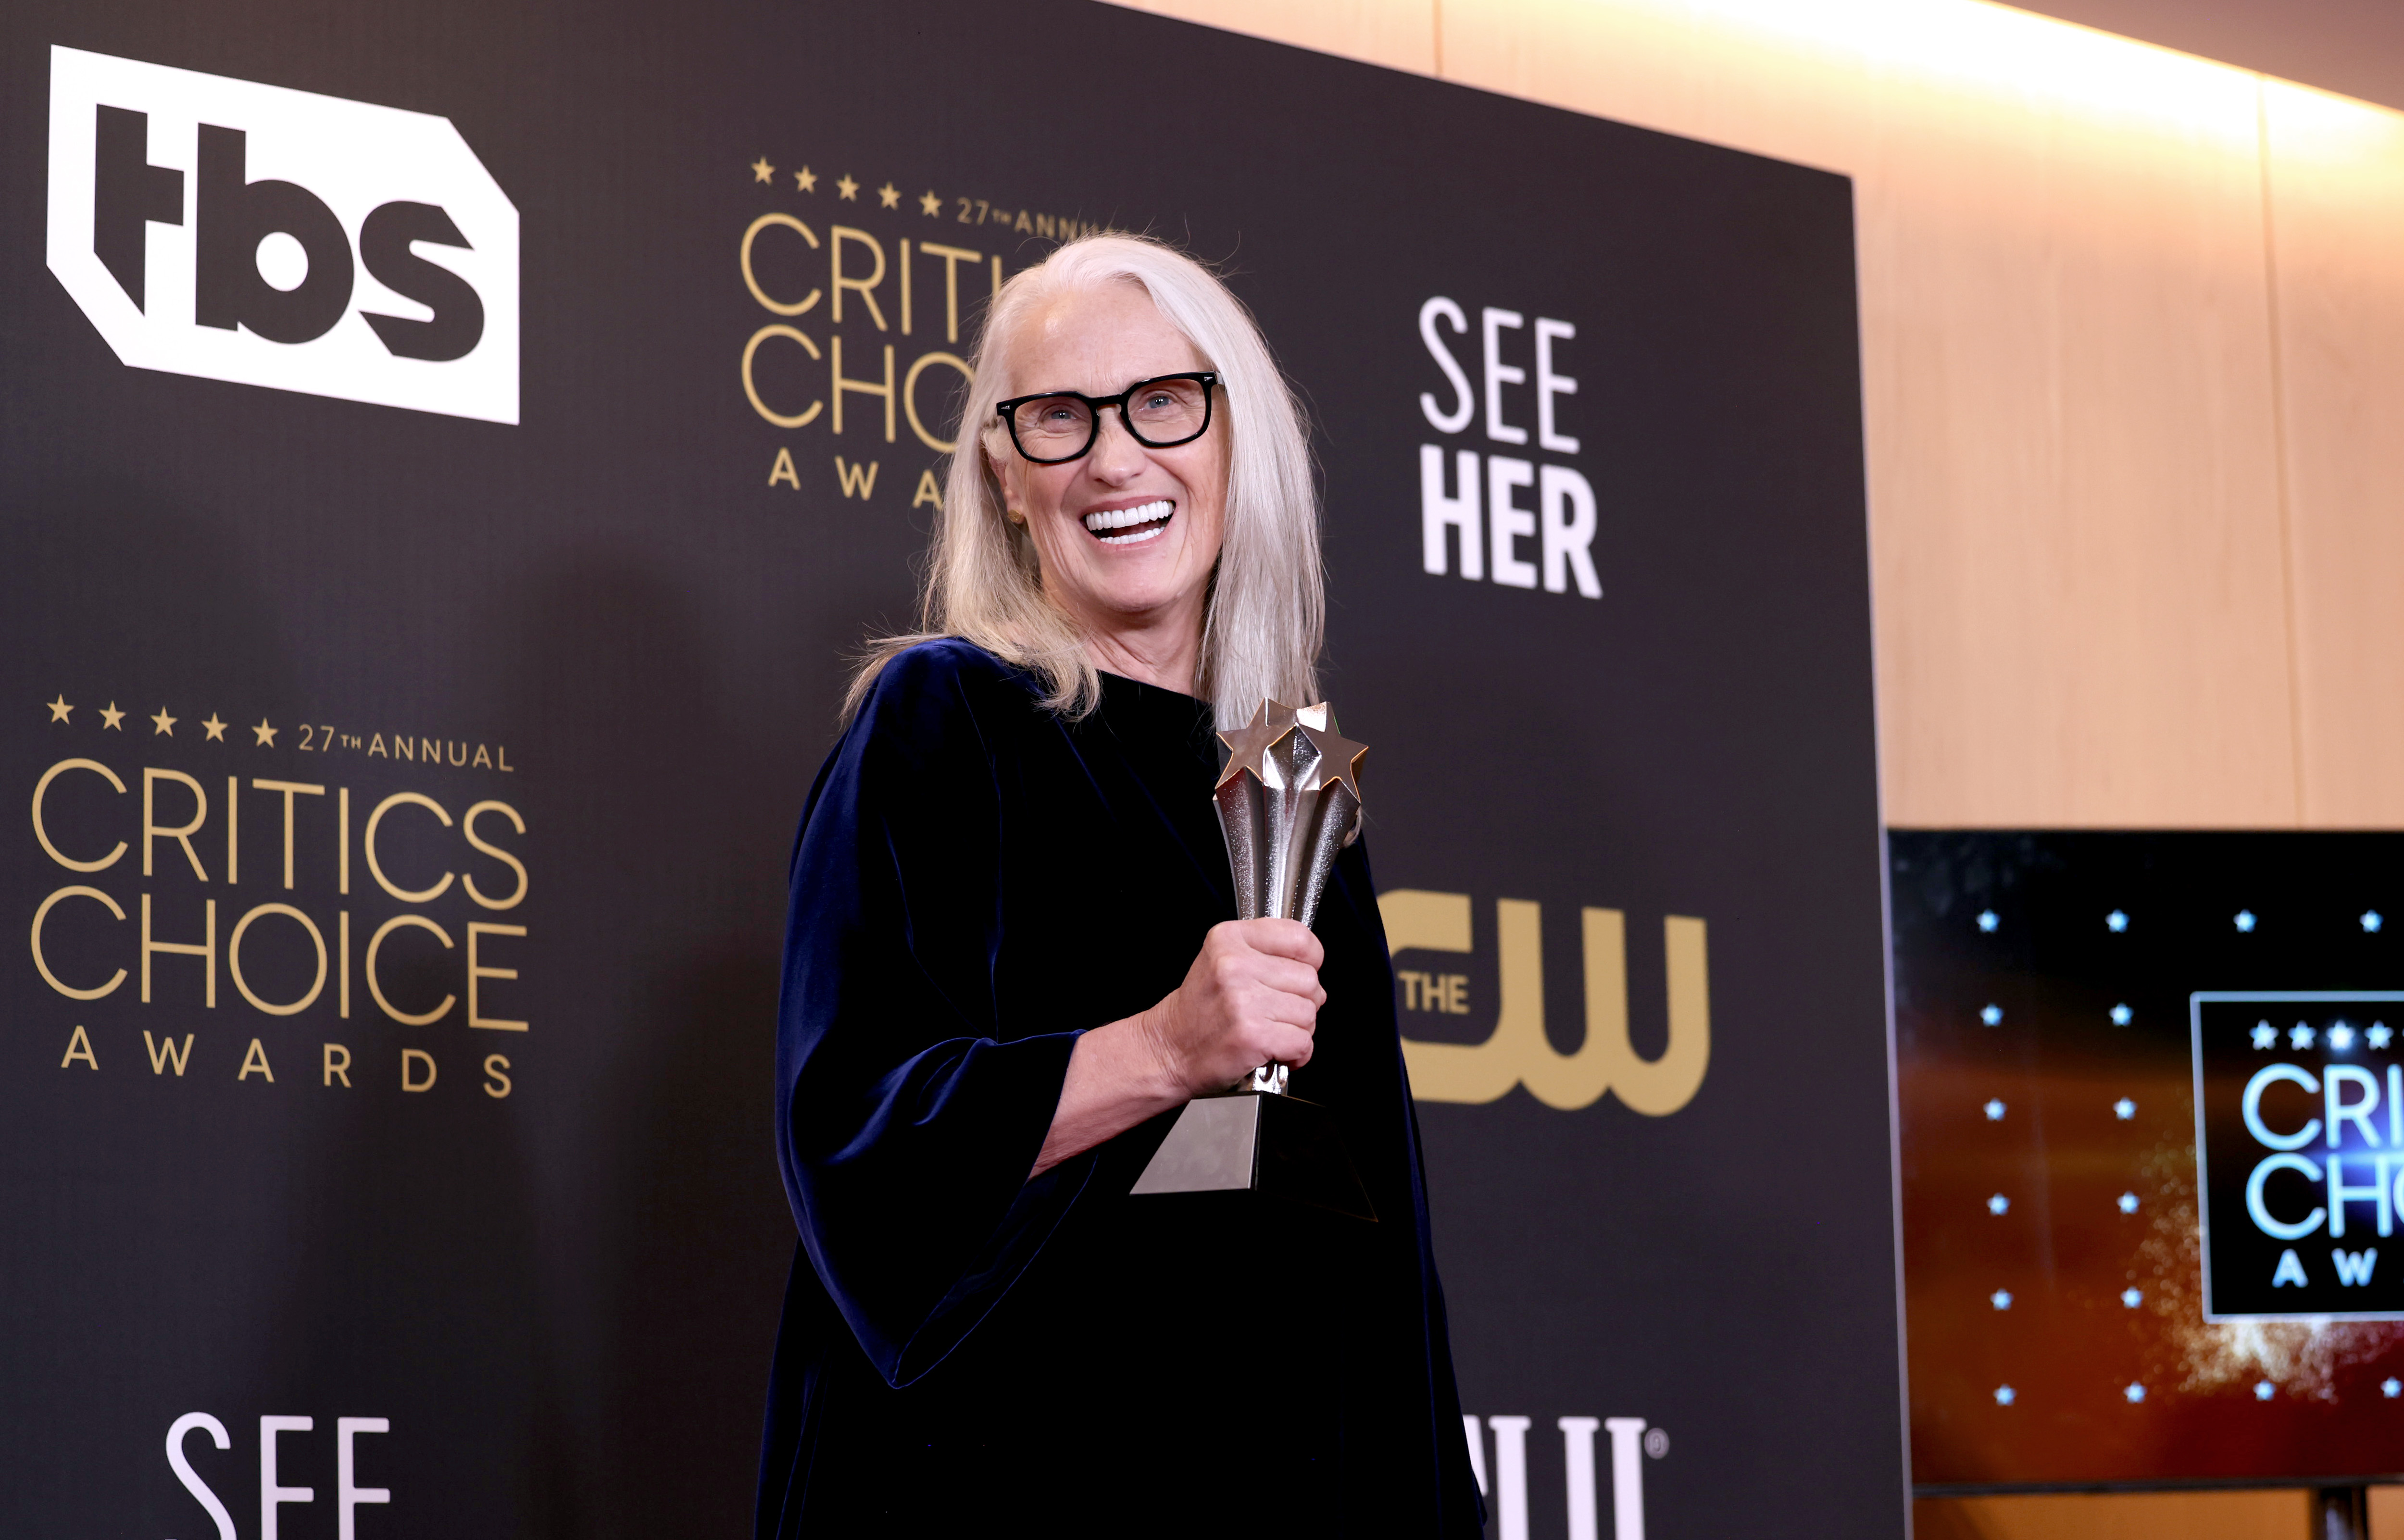 Jane Campion wins best director for The Power of the Dog at the Critic's Choice Awards.